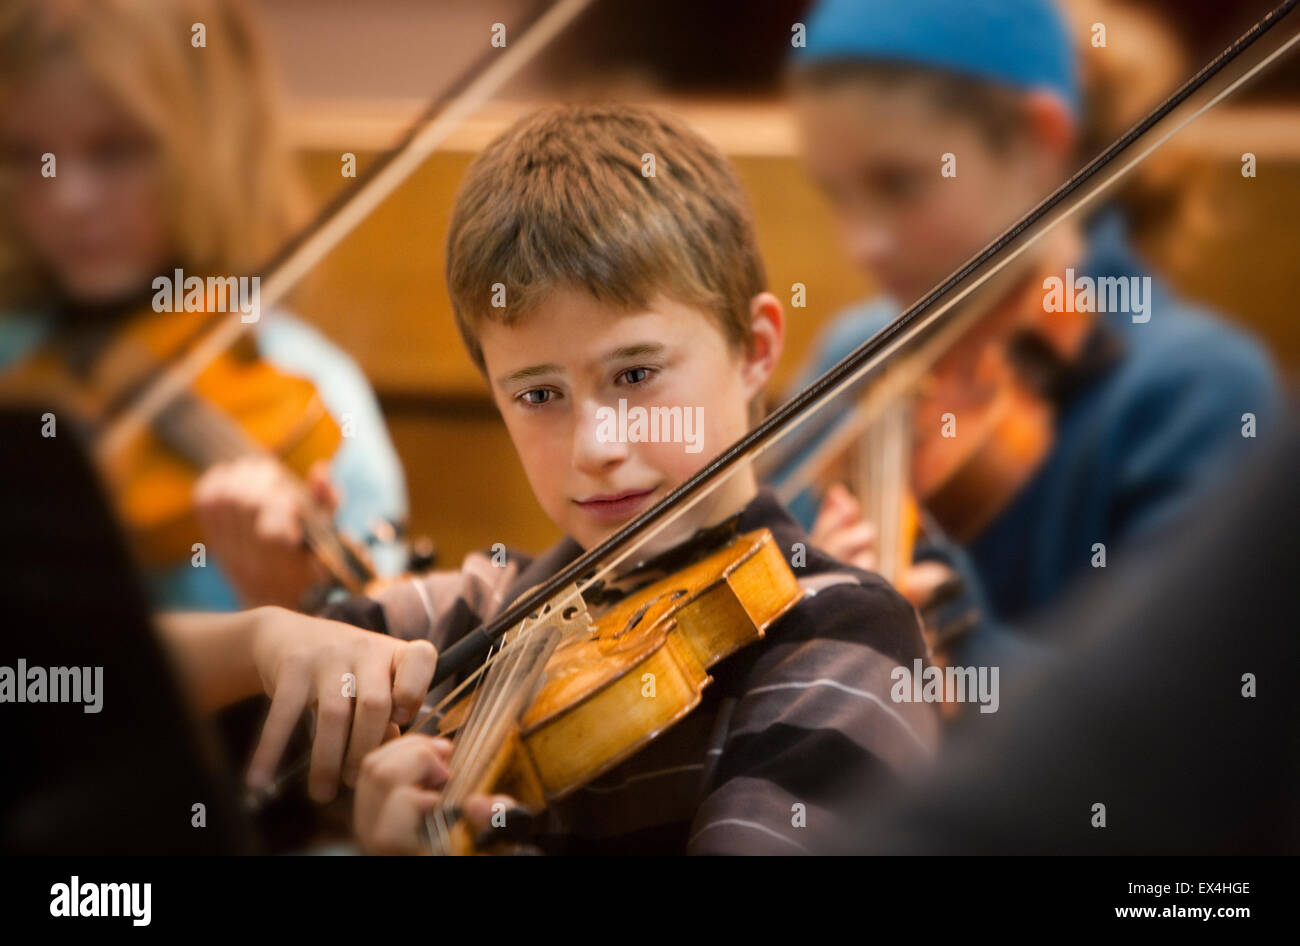 boy playing viola in orchestra Stock Photo